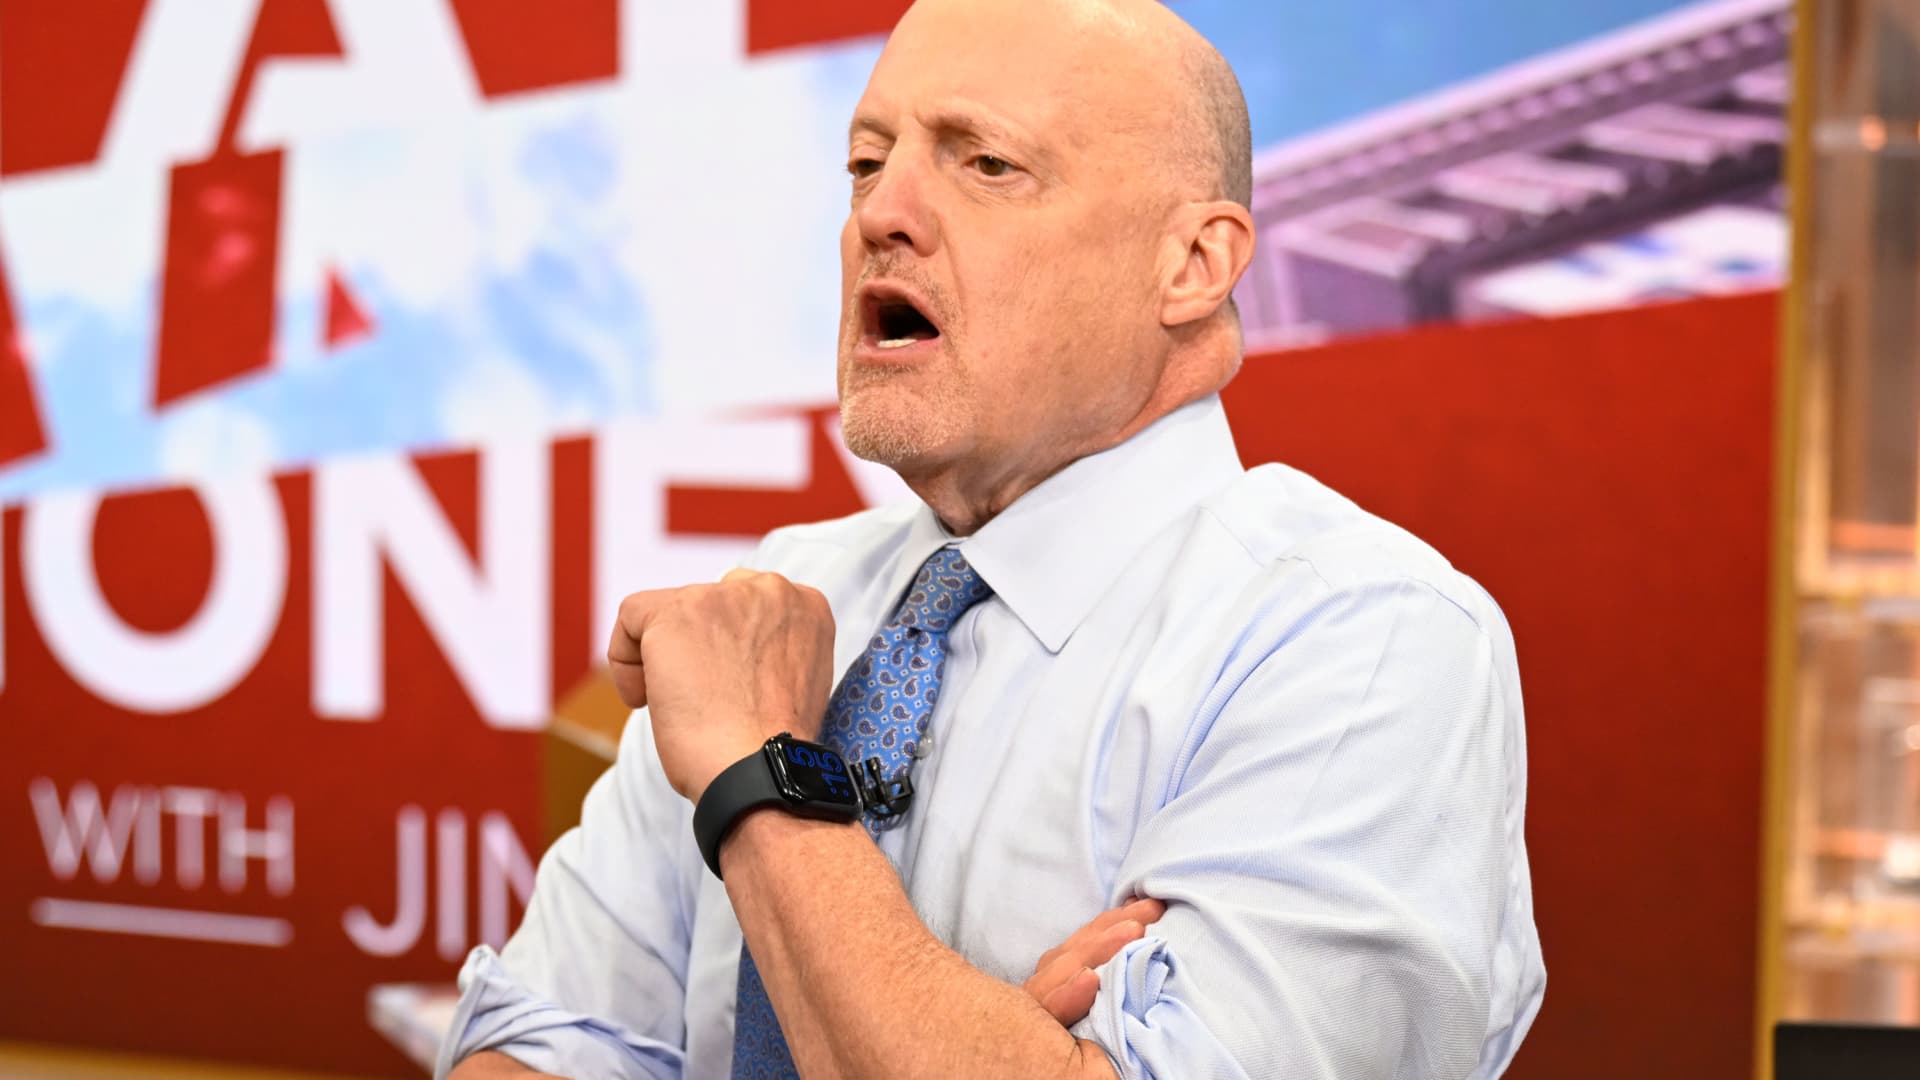 A week of earnings and economic records suggest a ‘wholesale reshuffling’ for shares, Jim Cramer says